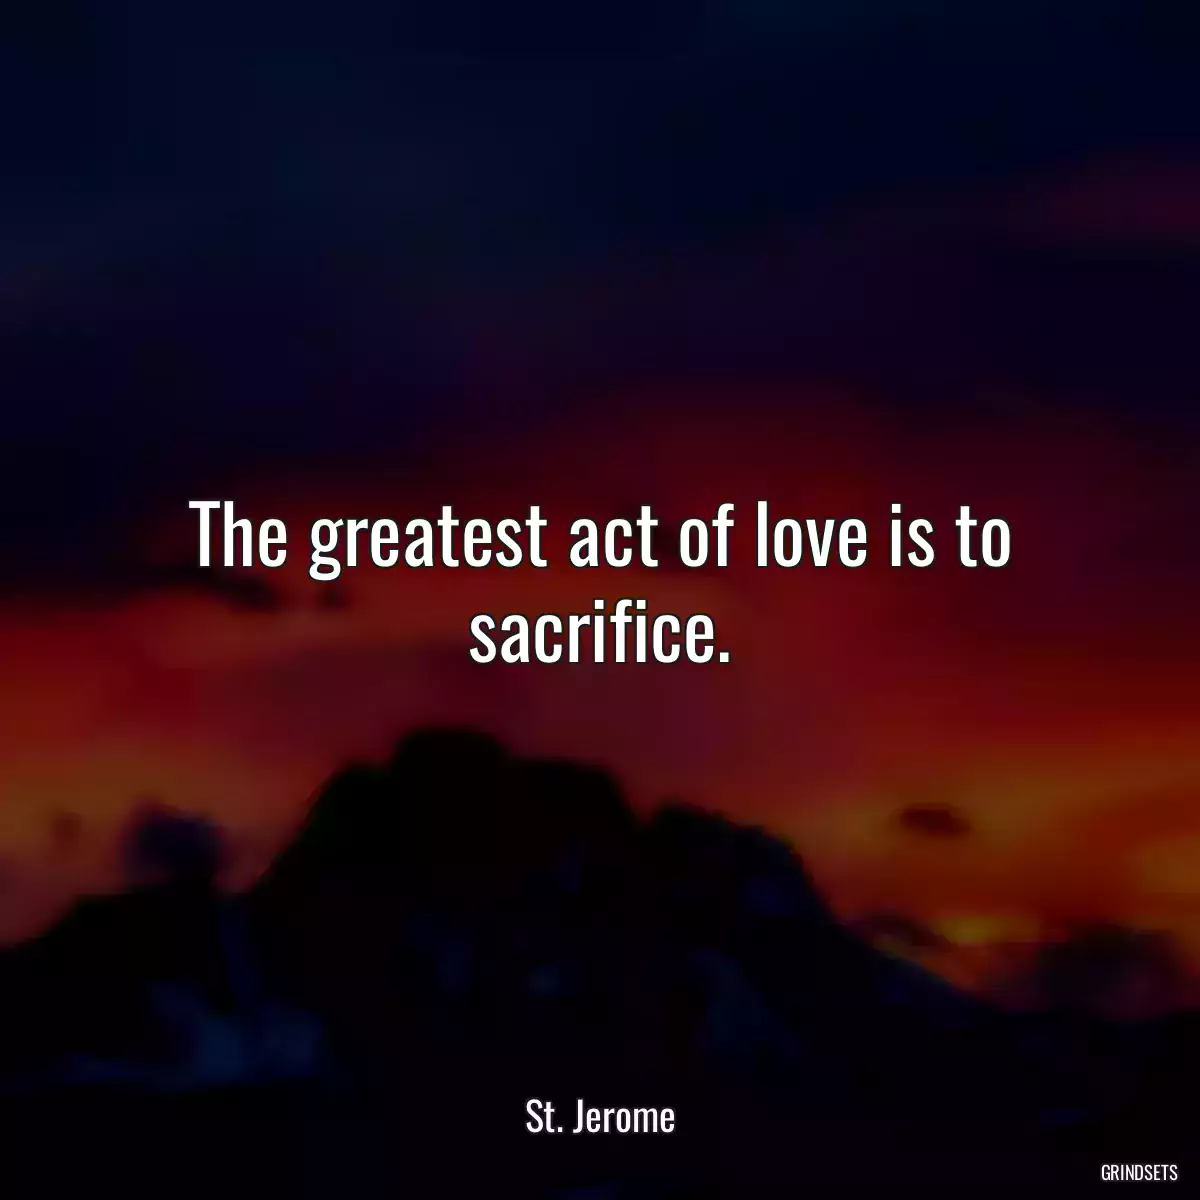 The greatest act of love is to sacrifice.